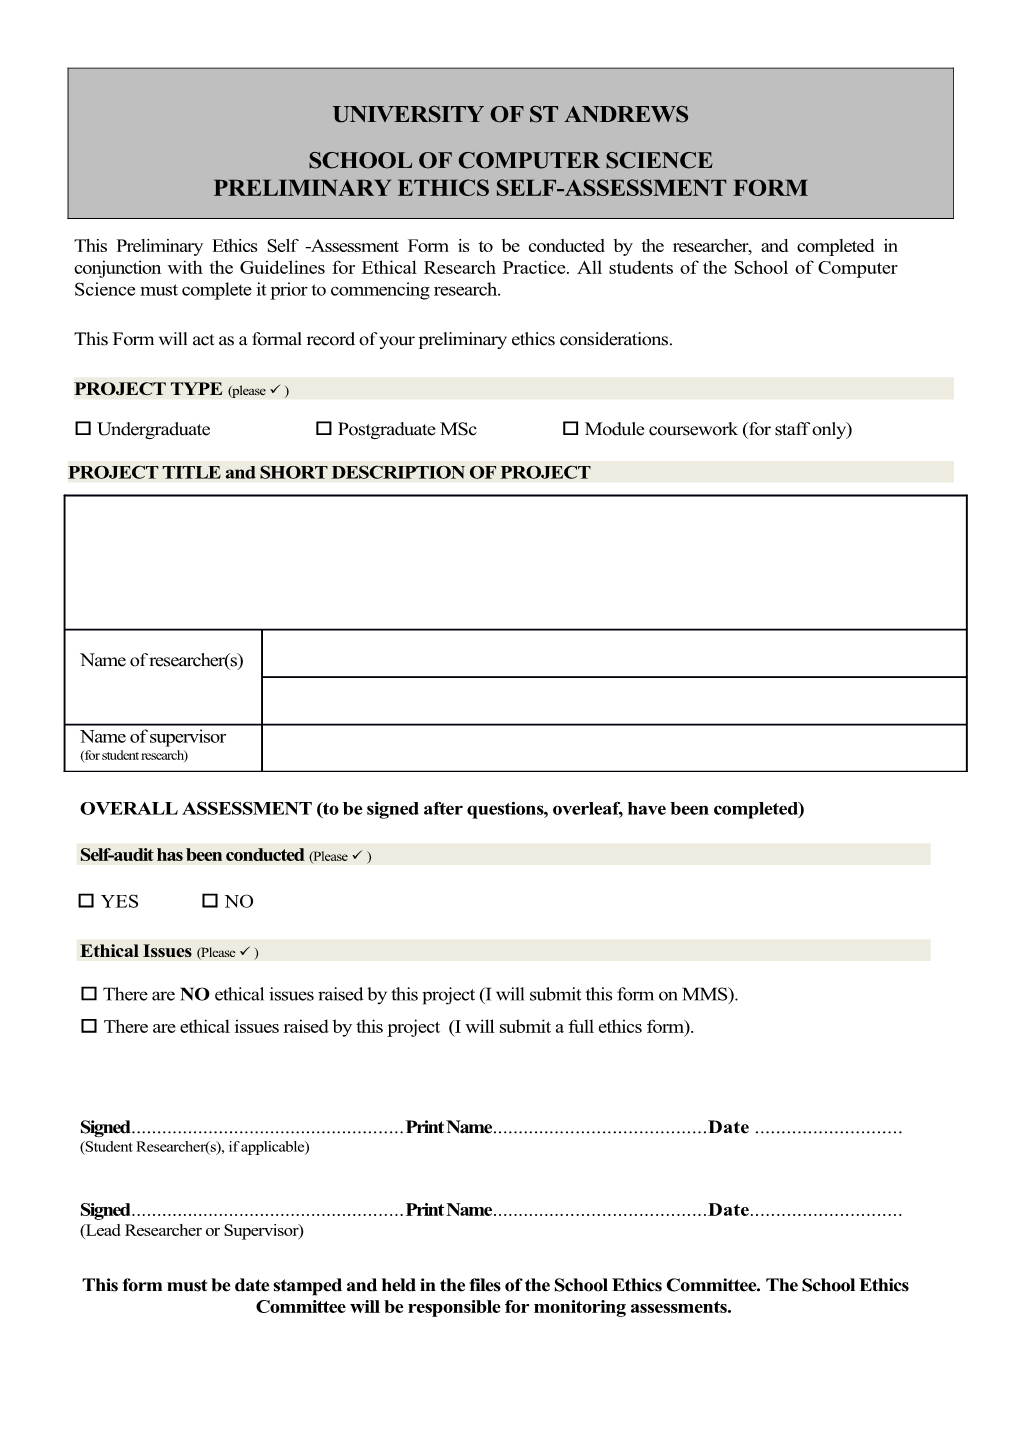 School of Computer Science Preliminary Ethics Self-Assessment Form